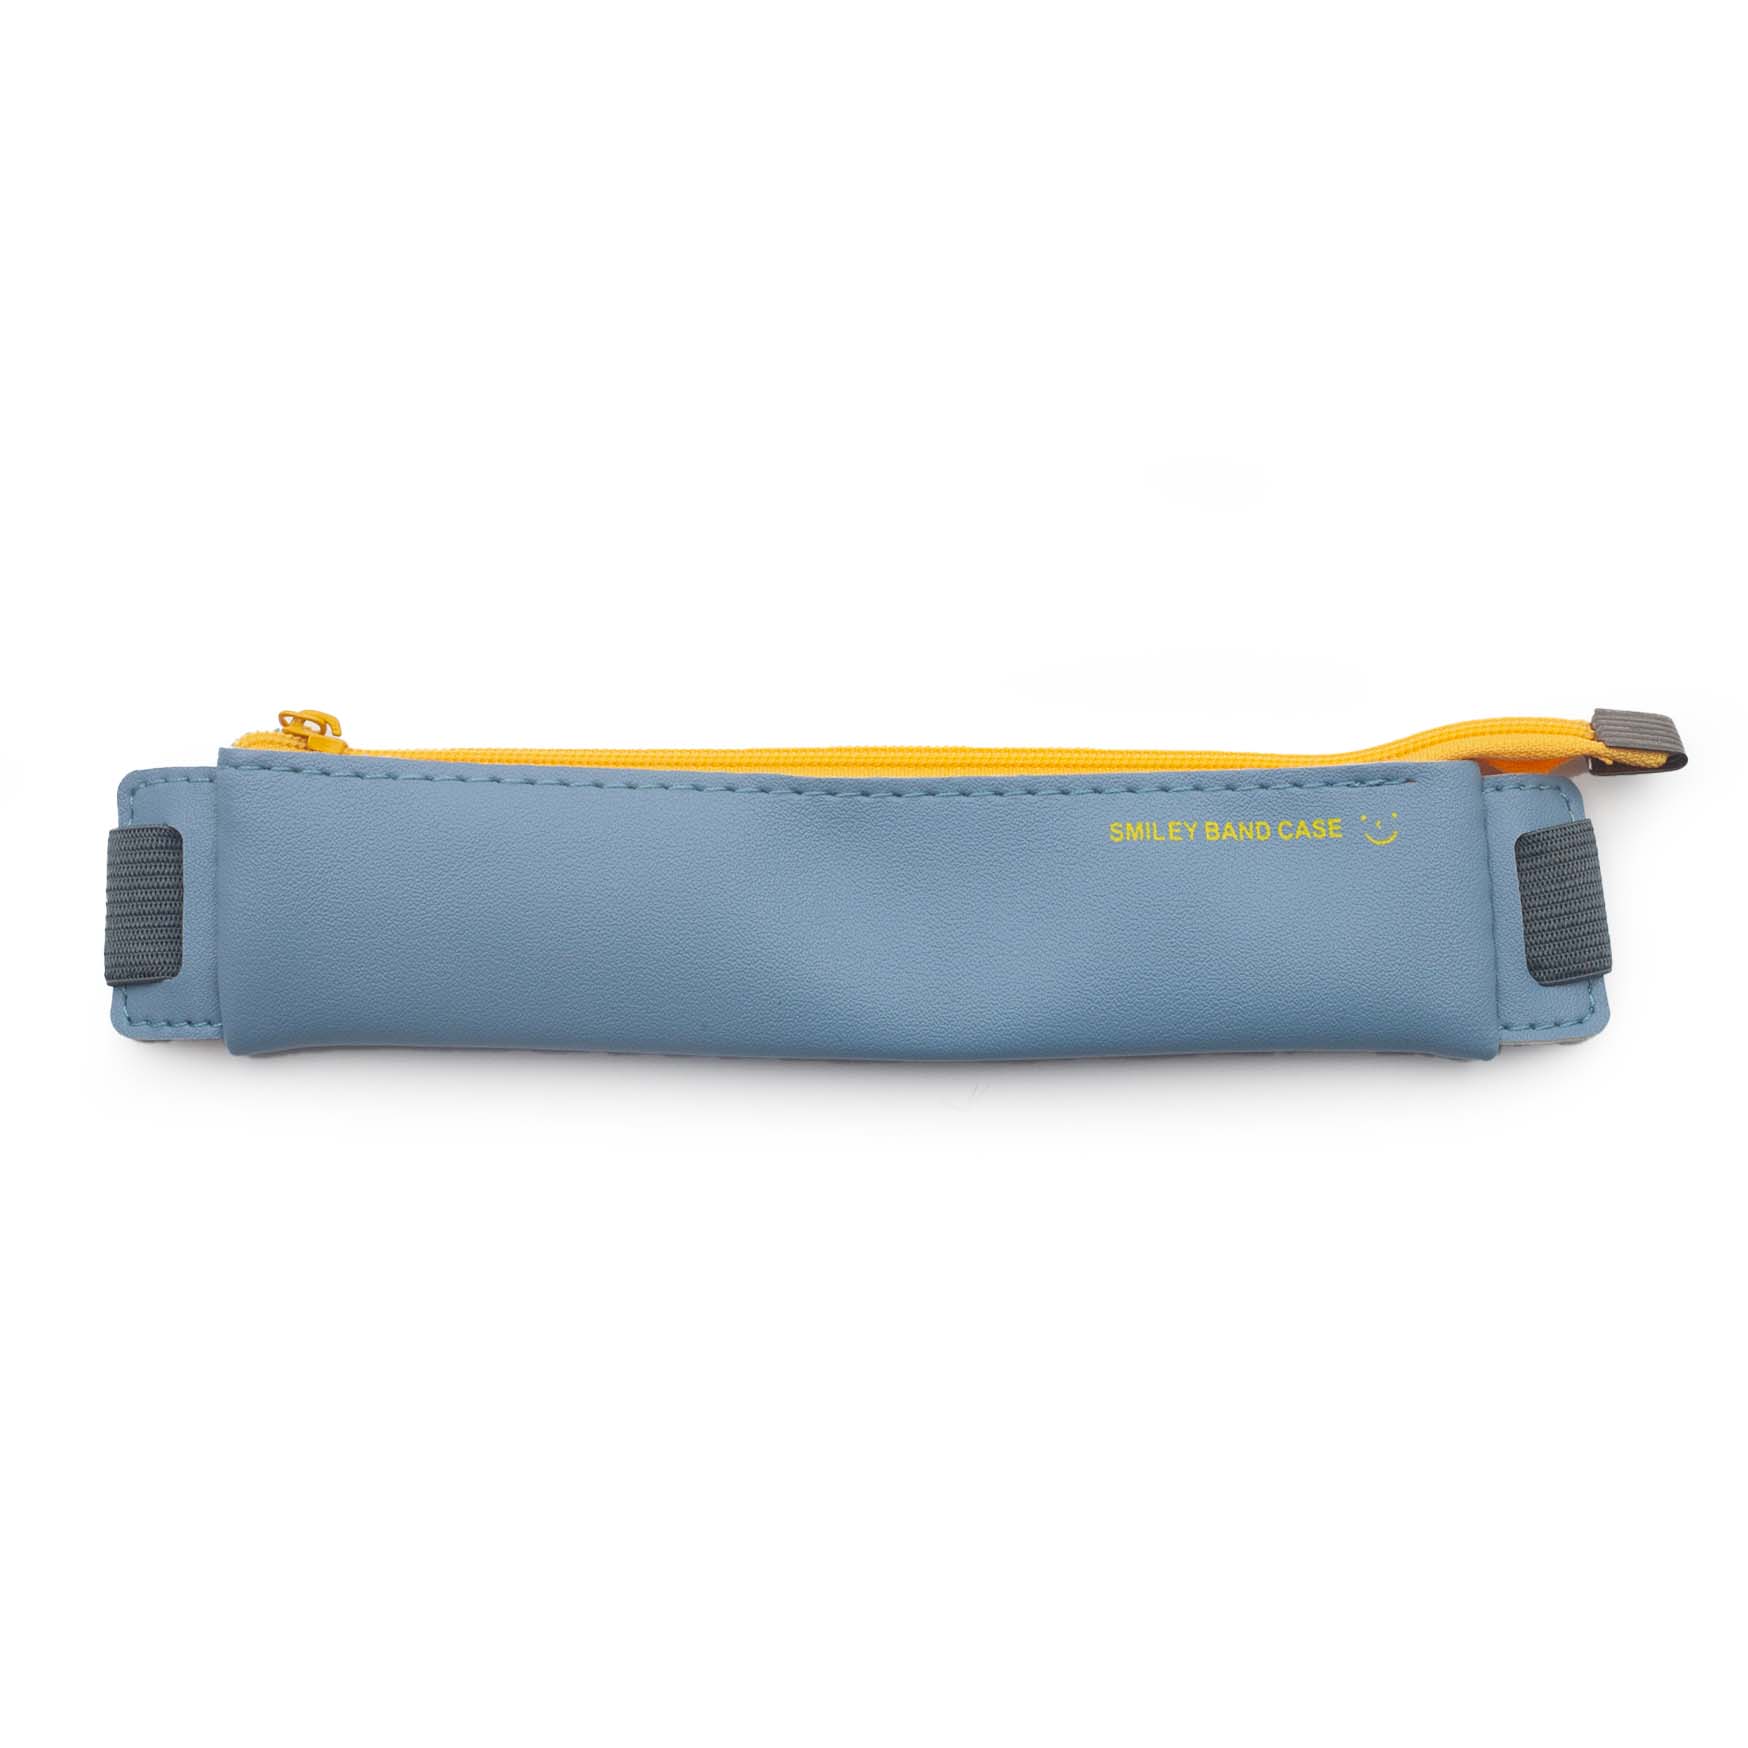 Image shows a blue diary/pencil pouch